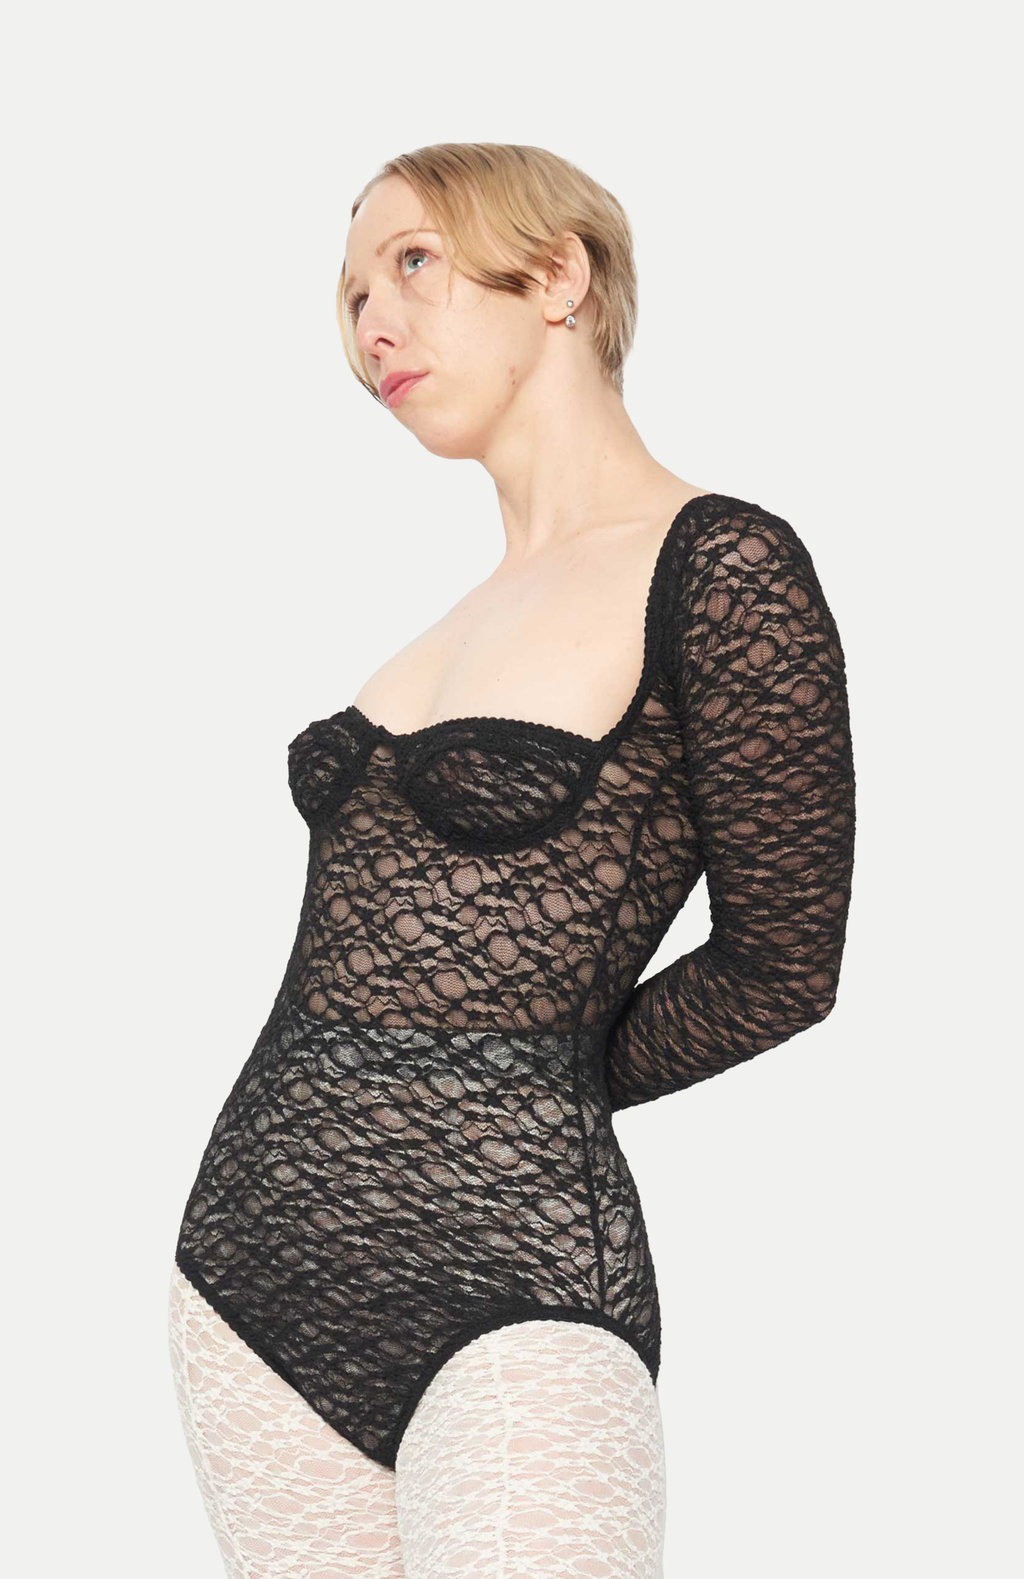 maroske peech A reprise of our signature stretch soft cup leotard in stunning black lace. Features a snap opening at gusset for ease wearer and zig-zag decorative stitching with a scalloped elastic detail.